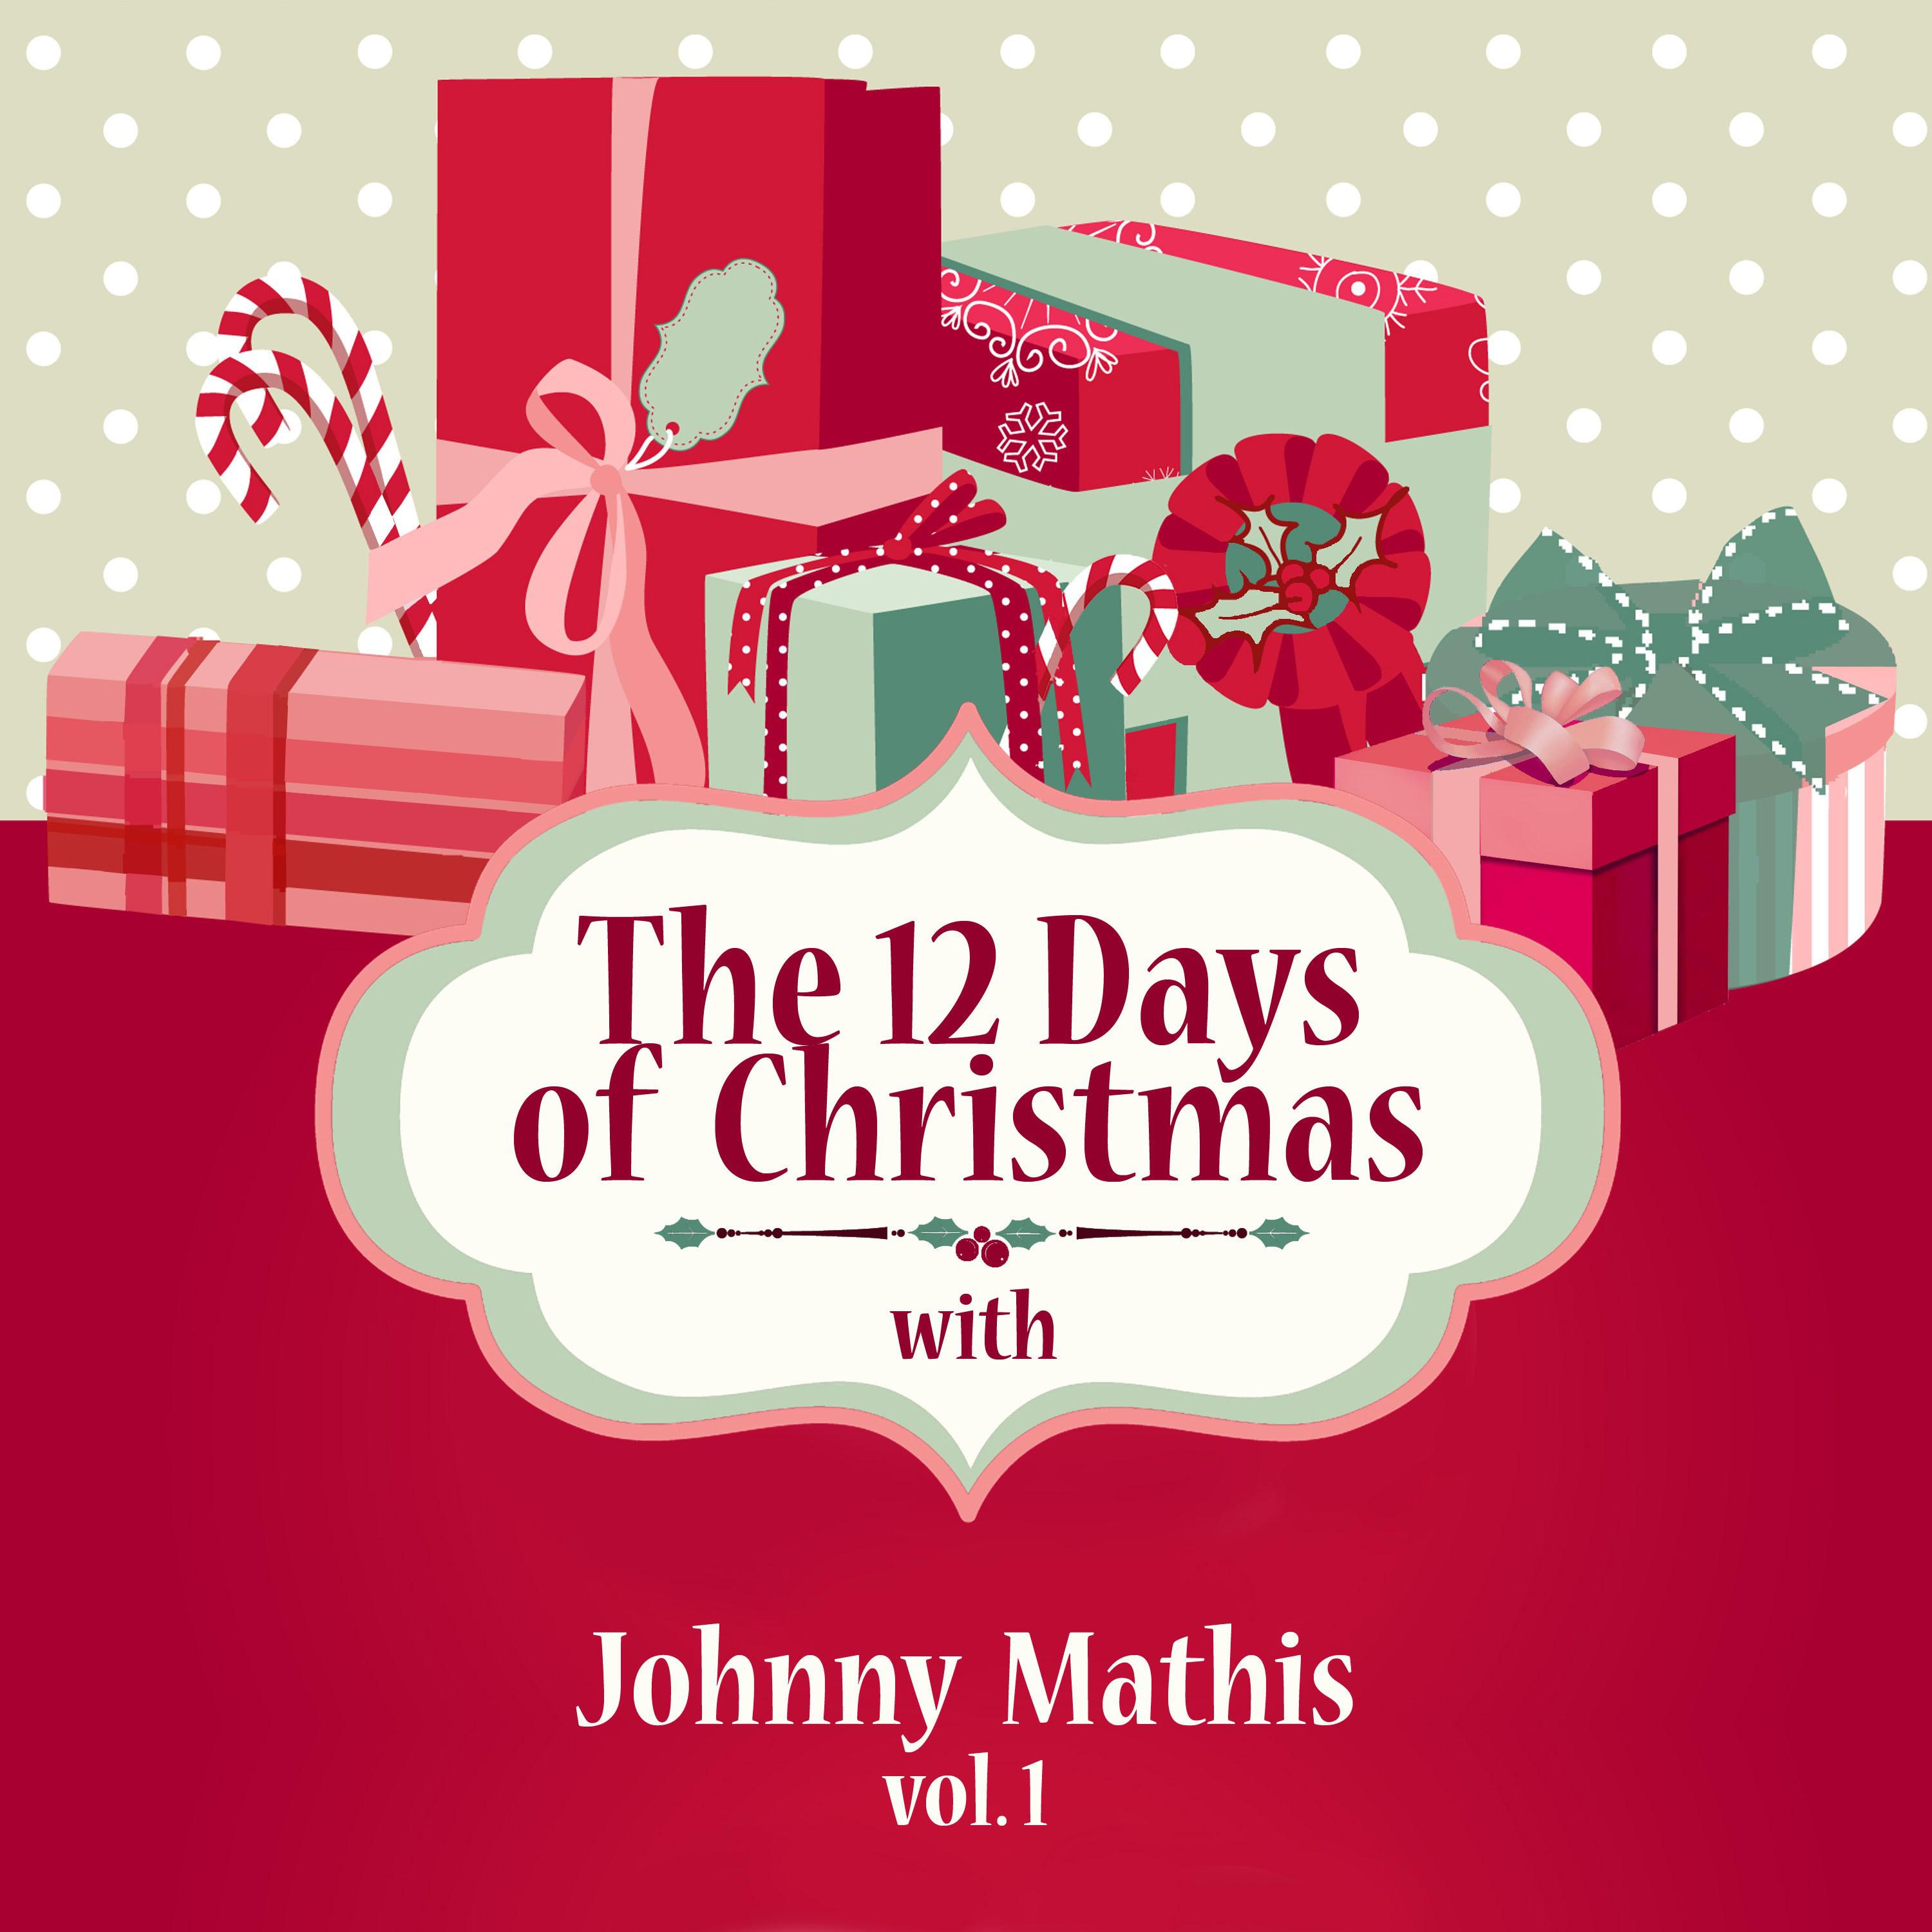 The 12 Days of Christmas with Johnny Mathis, Vol. 1